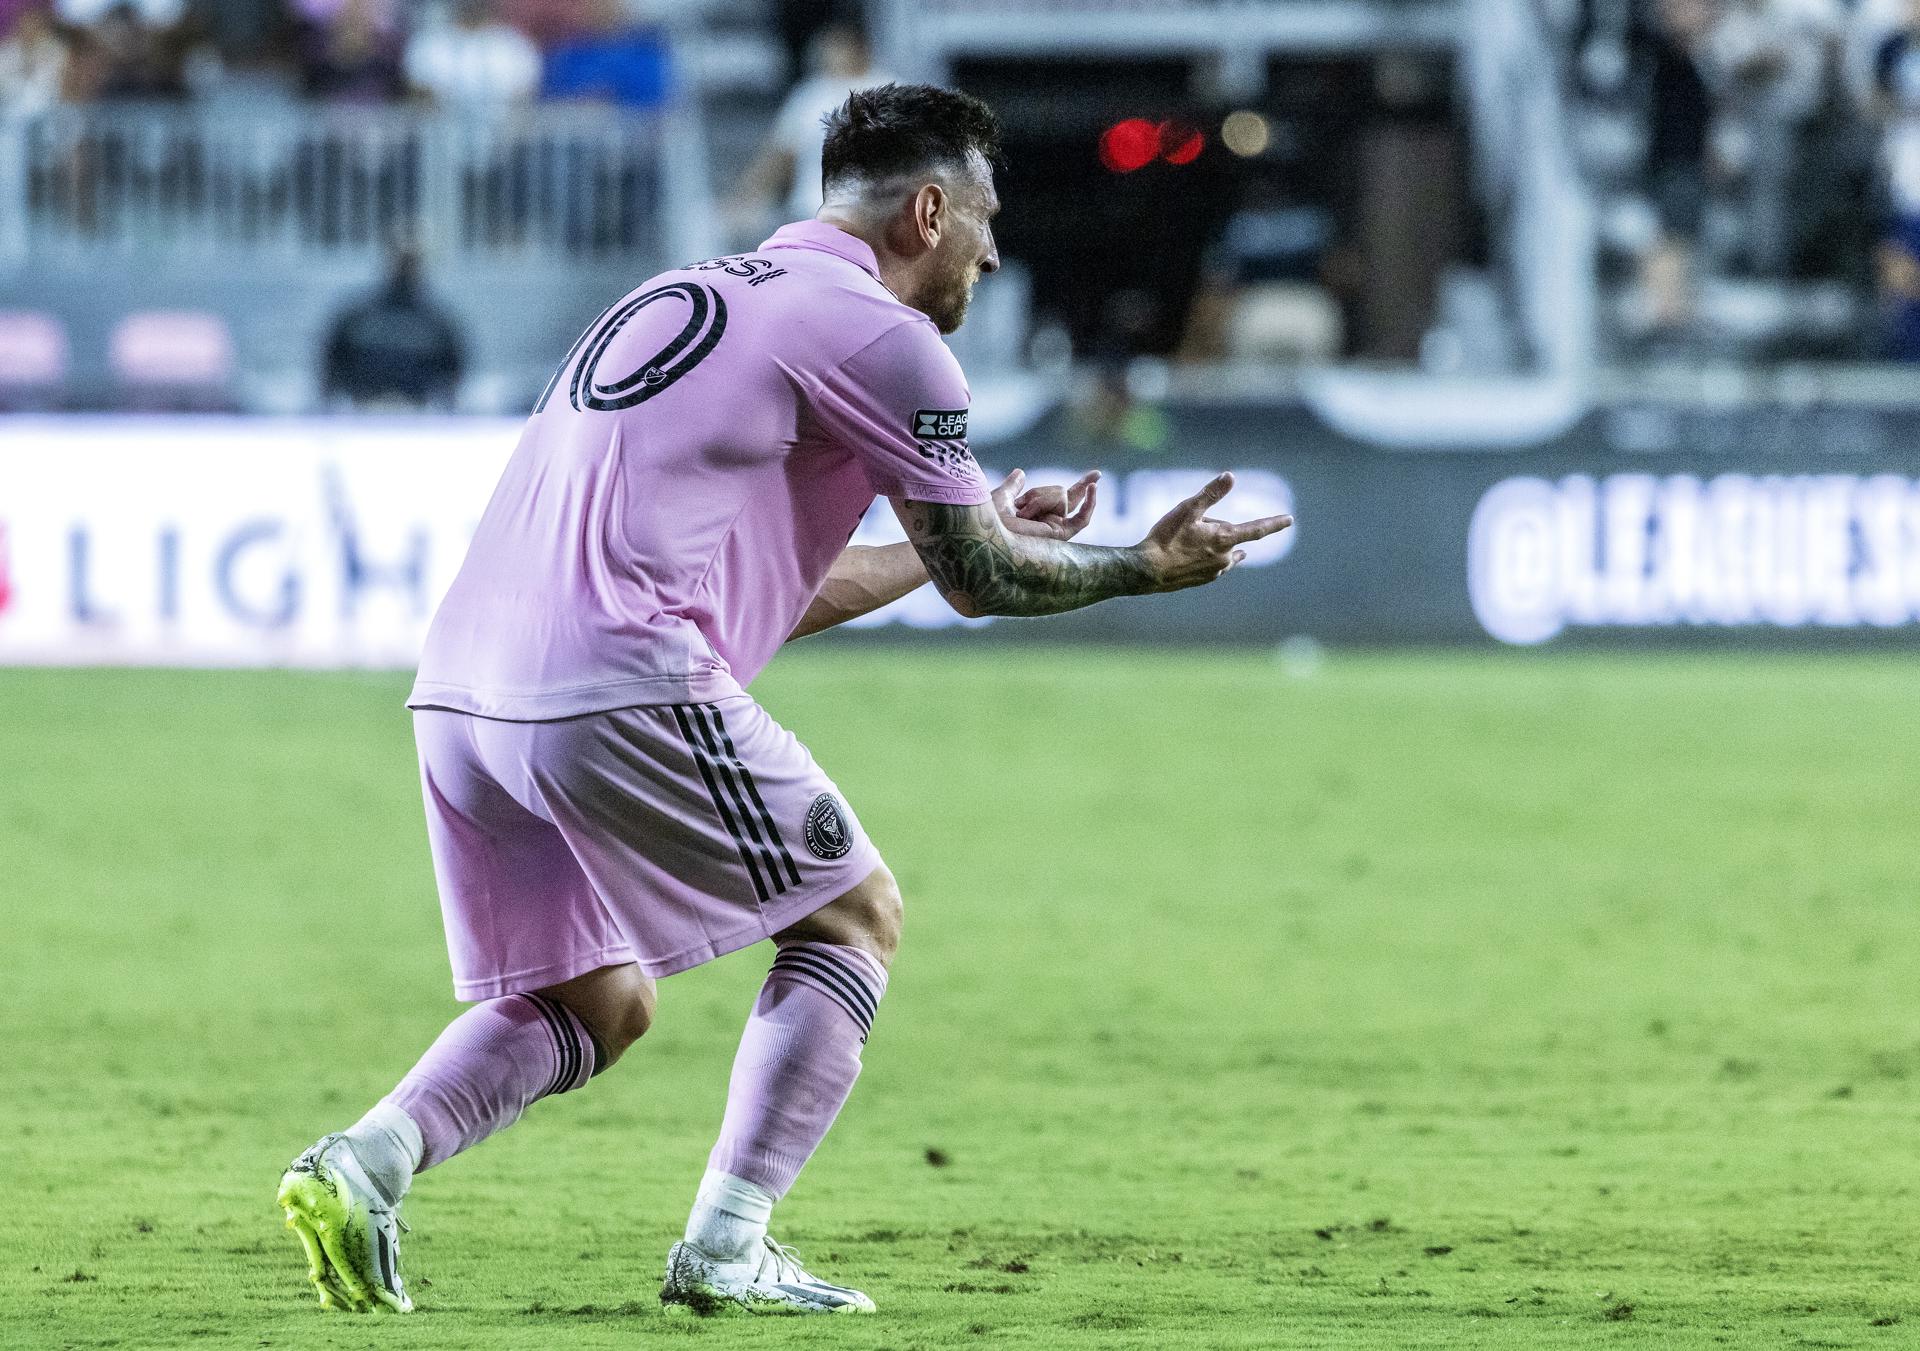 Inter Miami's Lionel Messi celebrates after scoring the 4-0 goal during the Leagues Cup quarter final soccer match between Inter Miami CF and Charlotte FC in Fort Lauderdale, Florida, US, 11 August 2023. EFE-EPA/CRISTOBAL HERRERA-ULASHKEVICH
